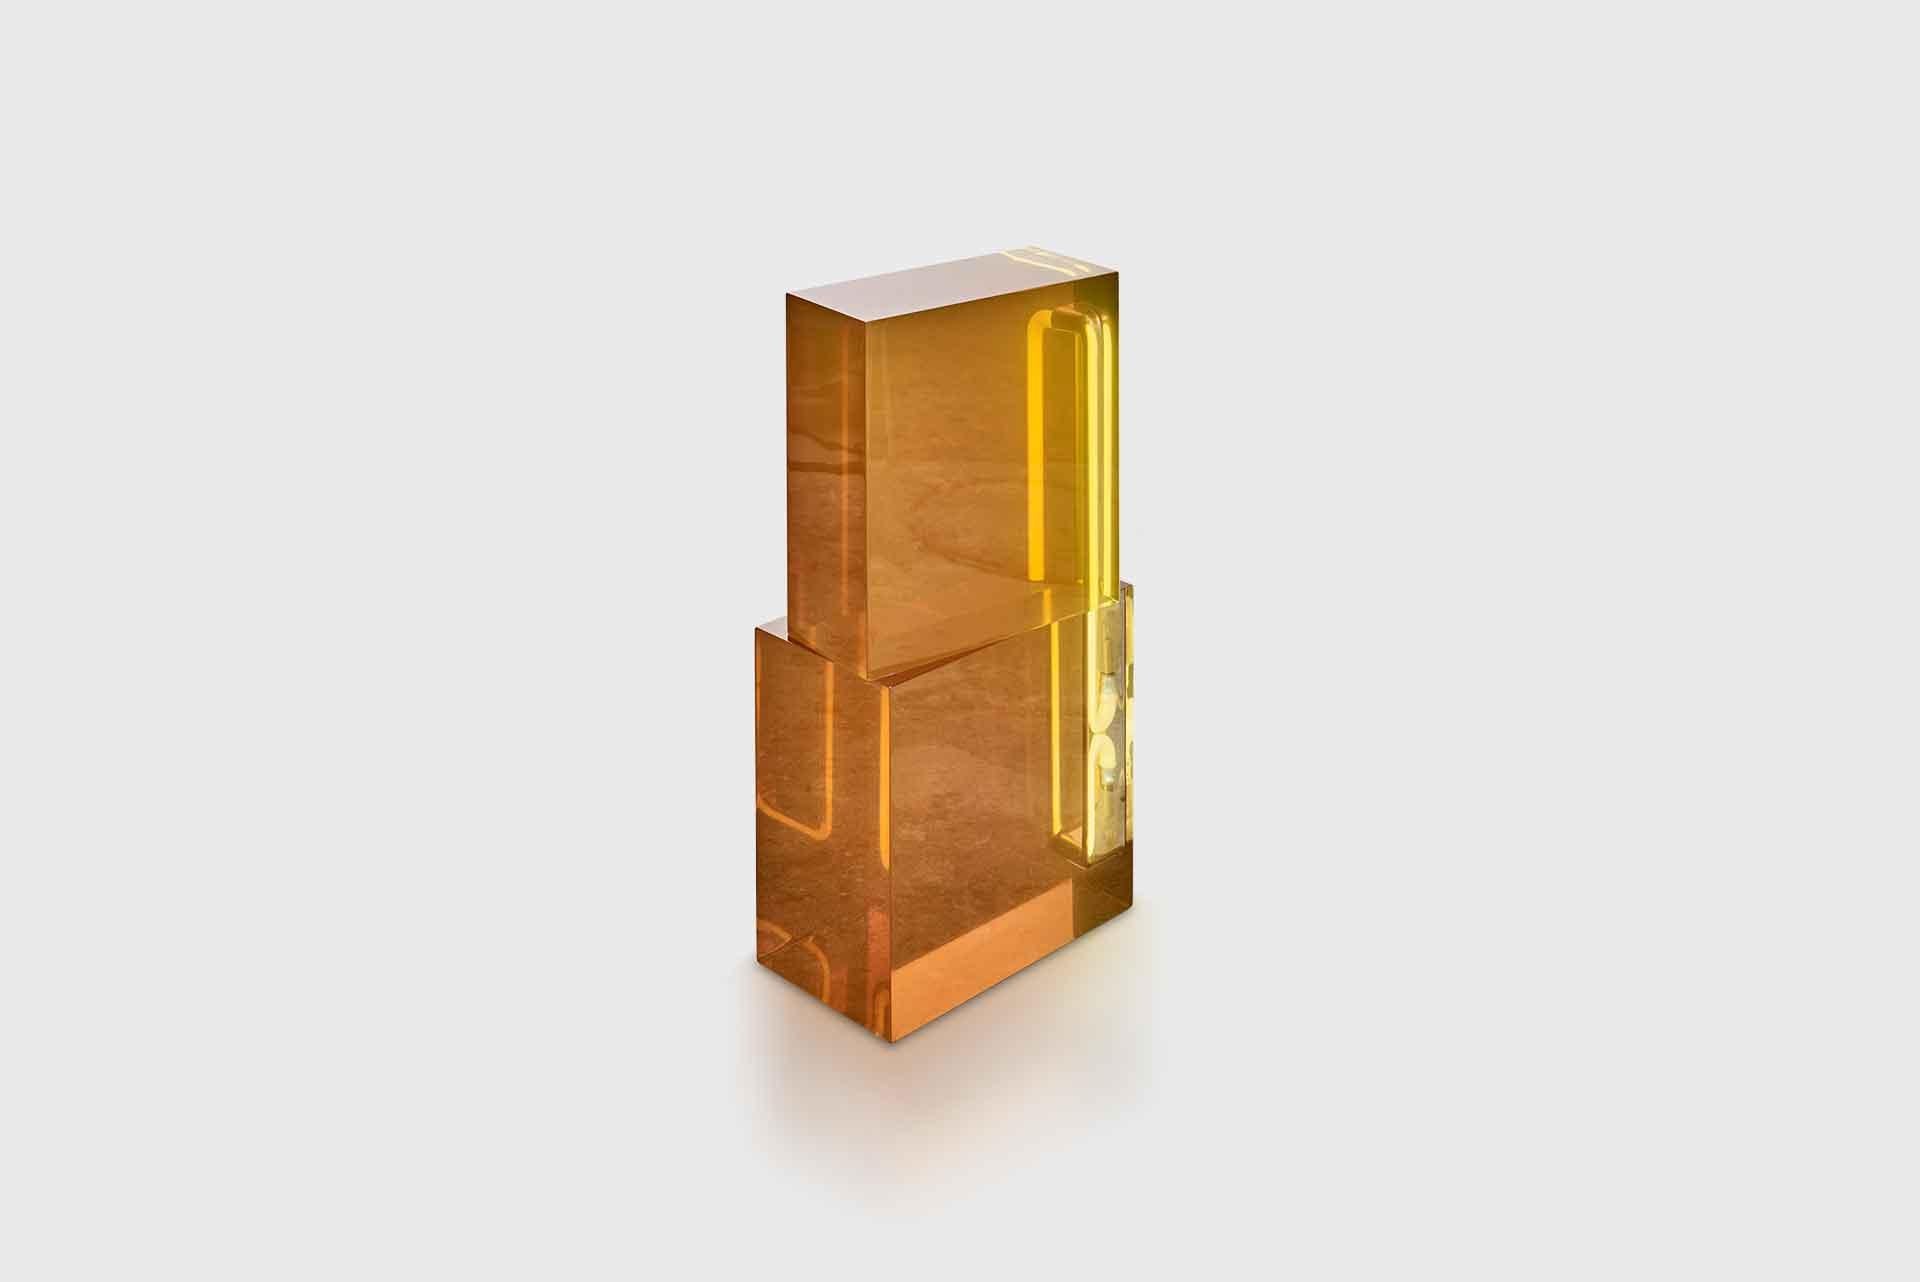 Table lamp model “Totem”
Manufactured by Sabine Marcelis
Produced in exclusive for SIDE GALLERY
Rotterdam, The Netherlands 2018
Resin, Neon (+transformer)

Measurements
30 cm x 17 cm x 60h cm
11,81 in x 6,69 in x 23,62h